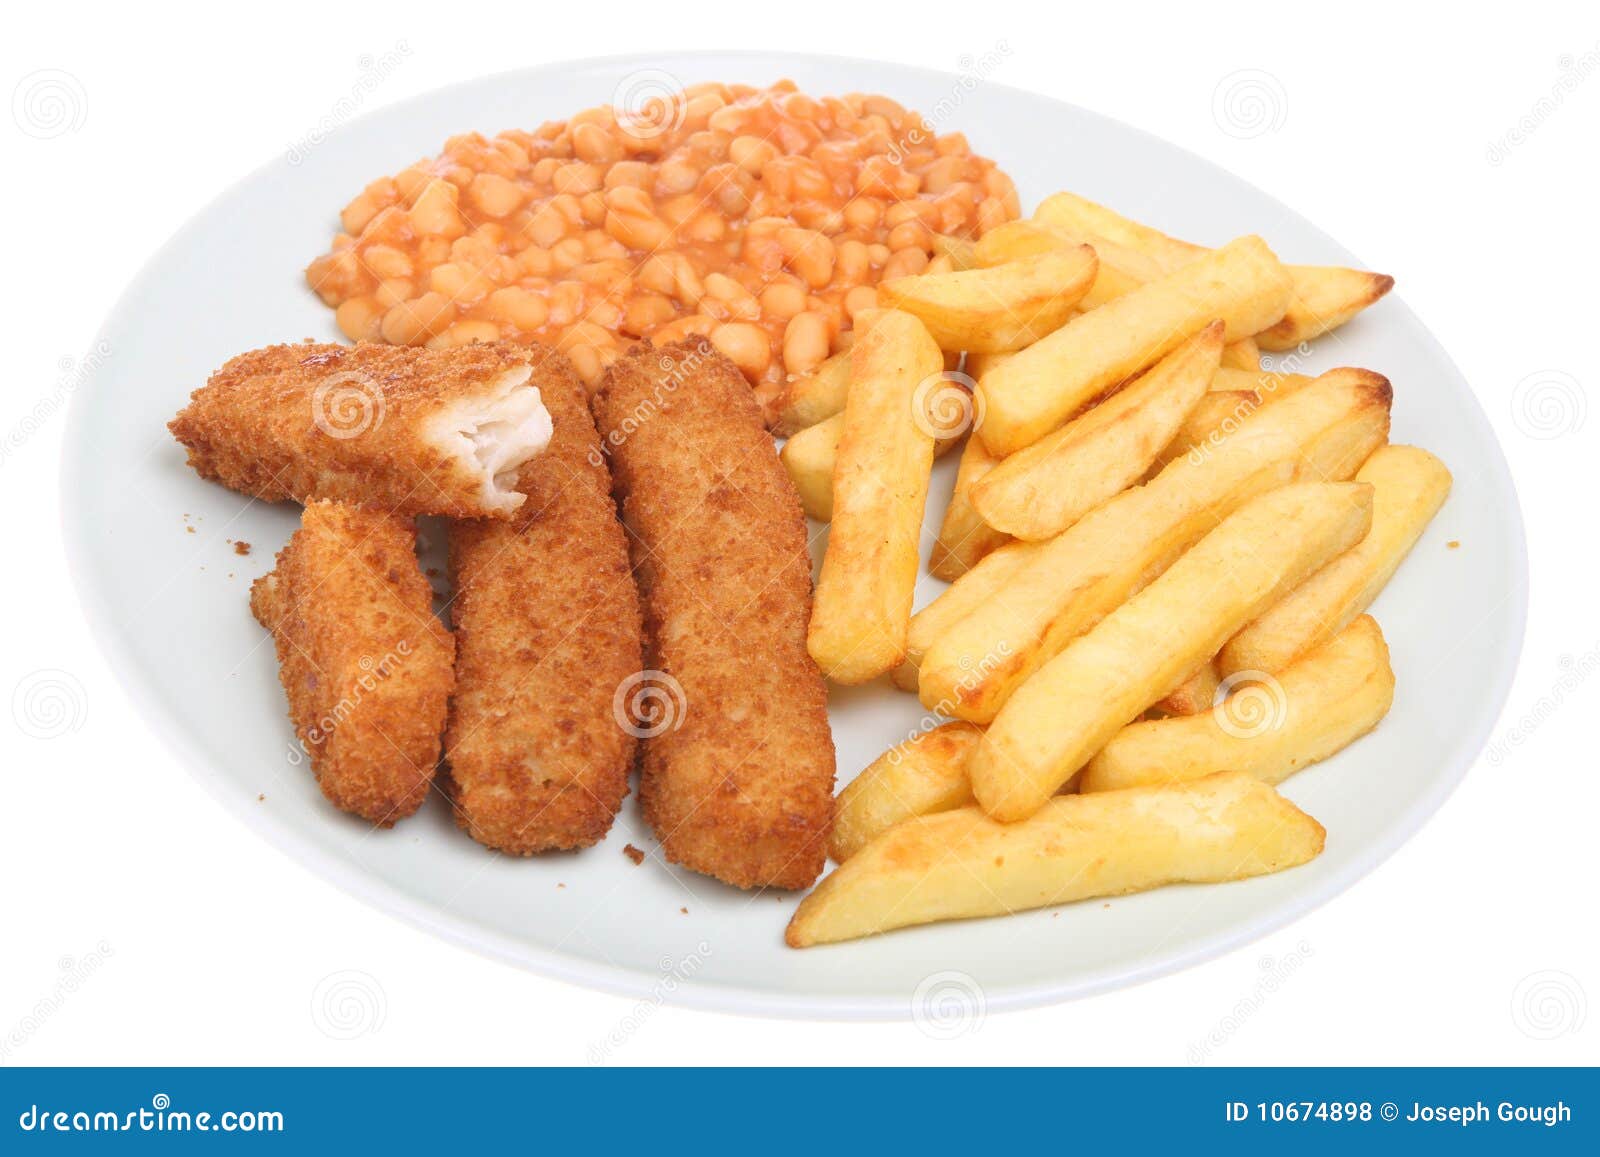 free clipart fish and chips - photo #45